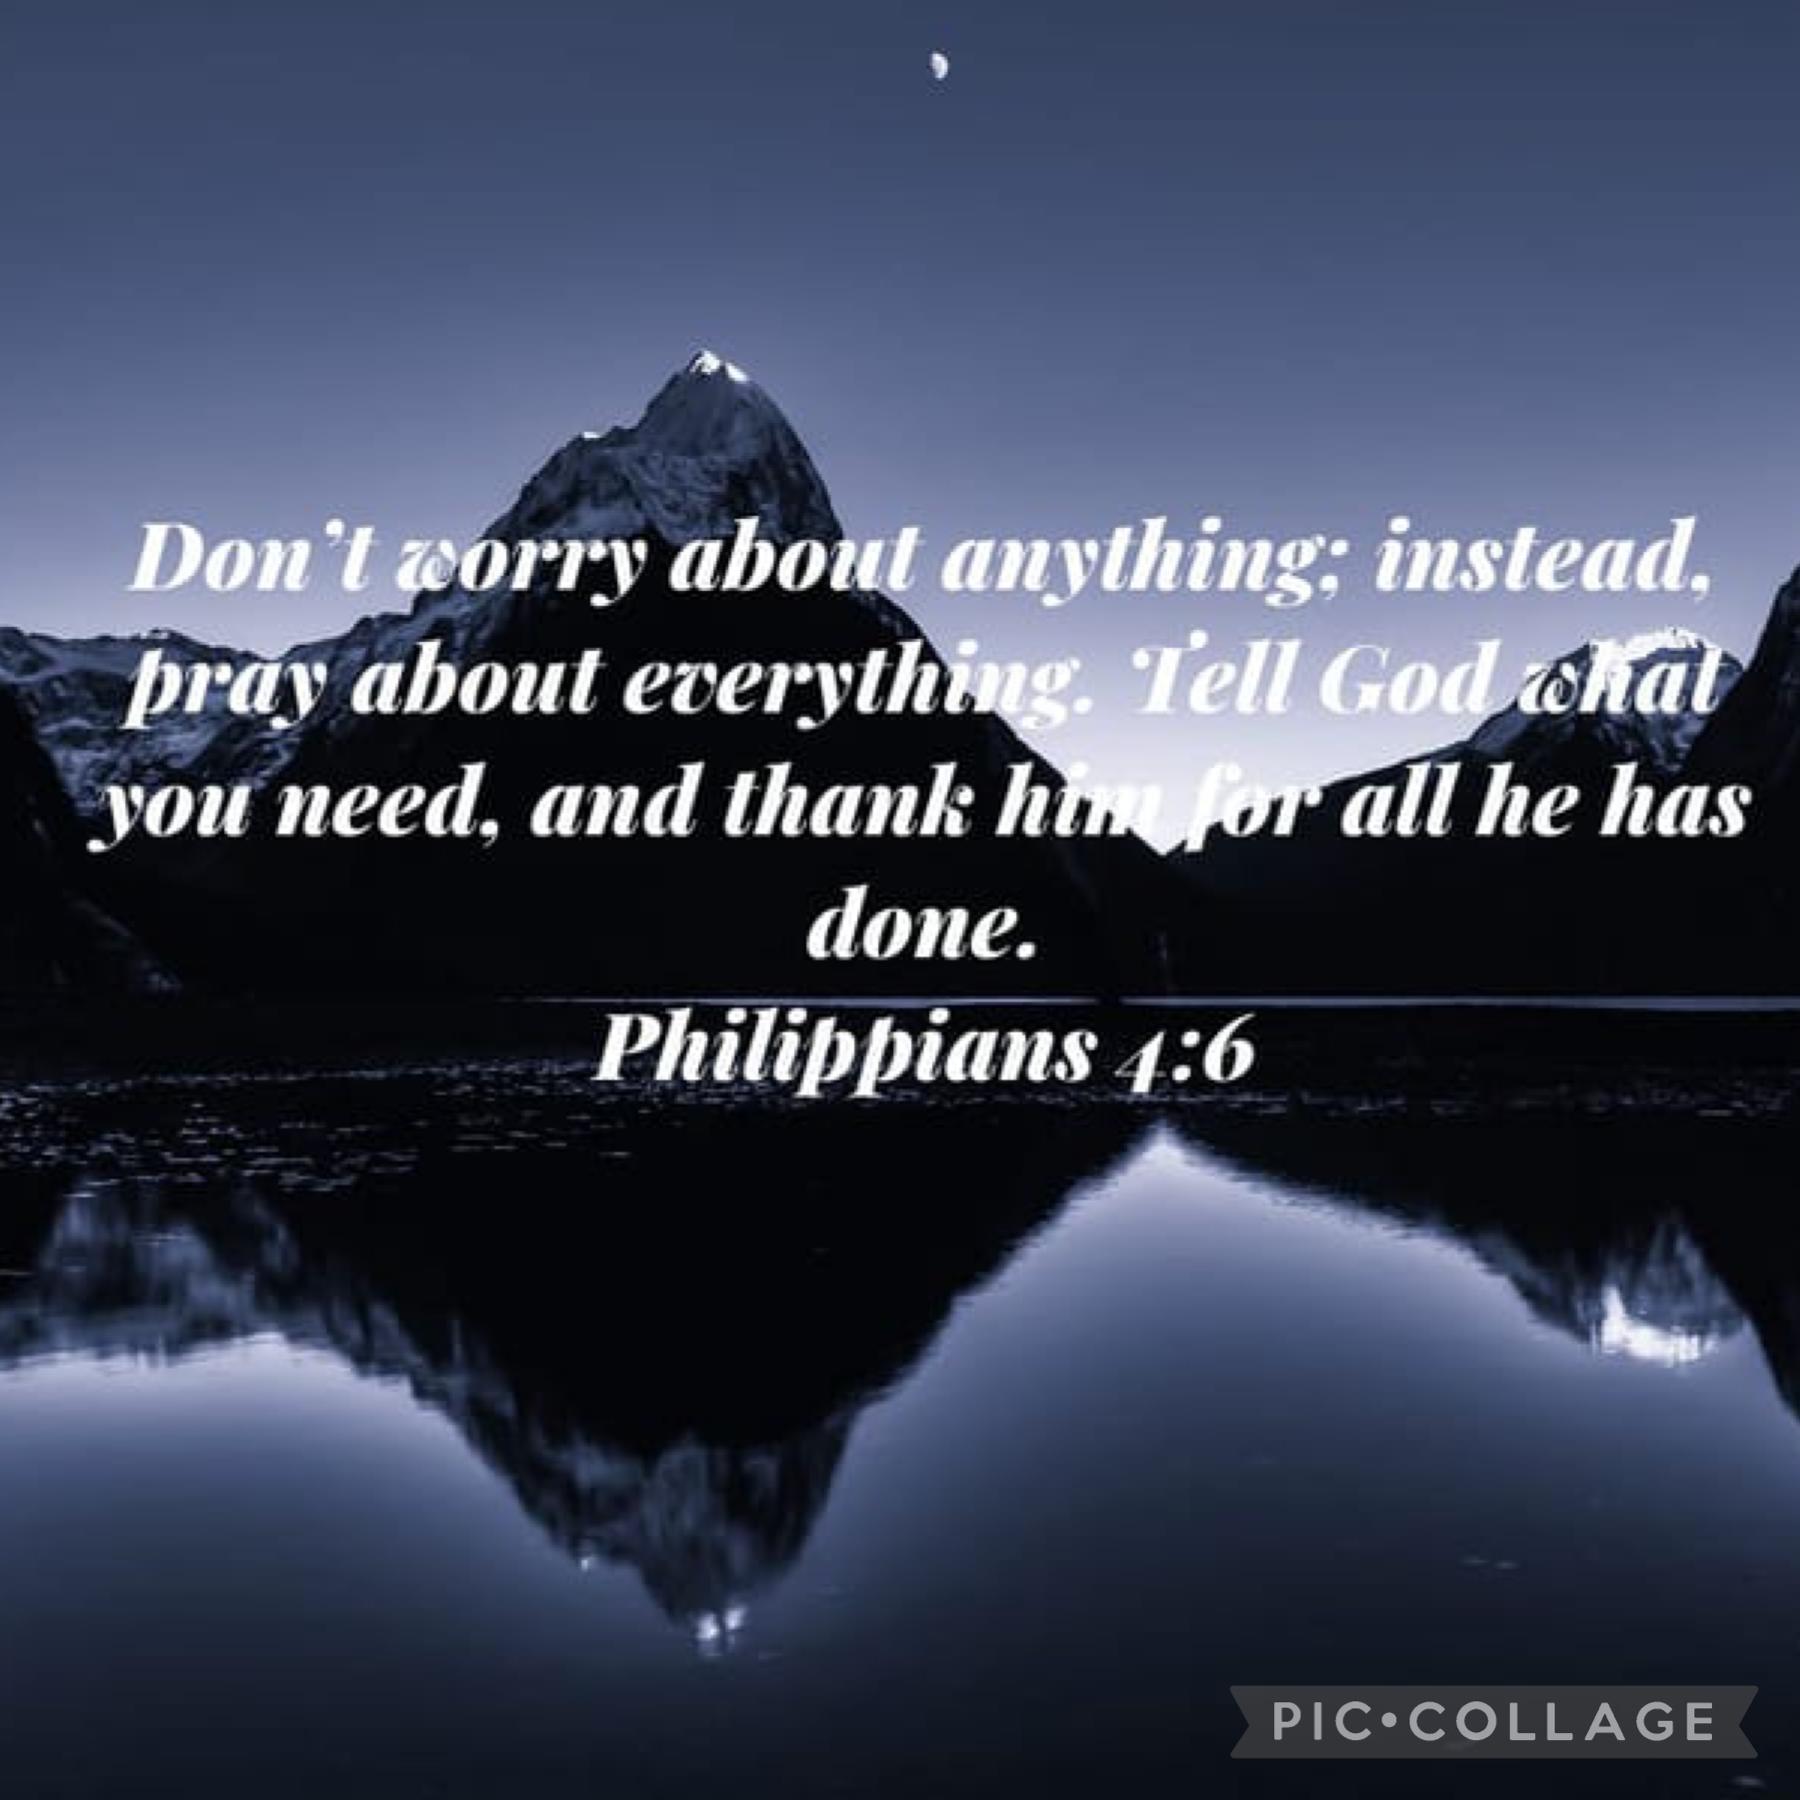 made by me in the bible app